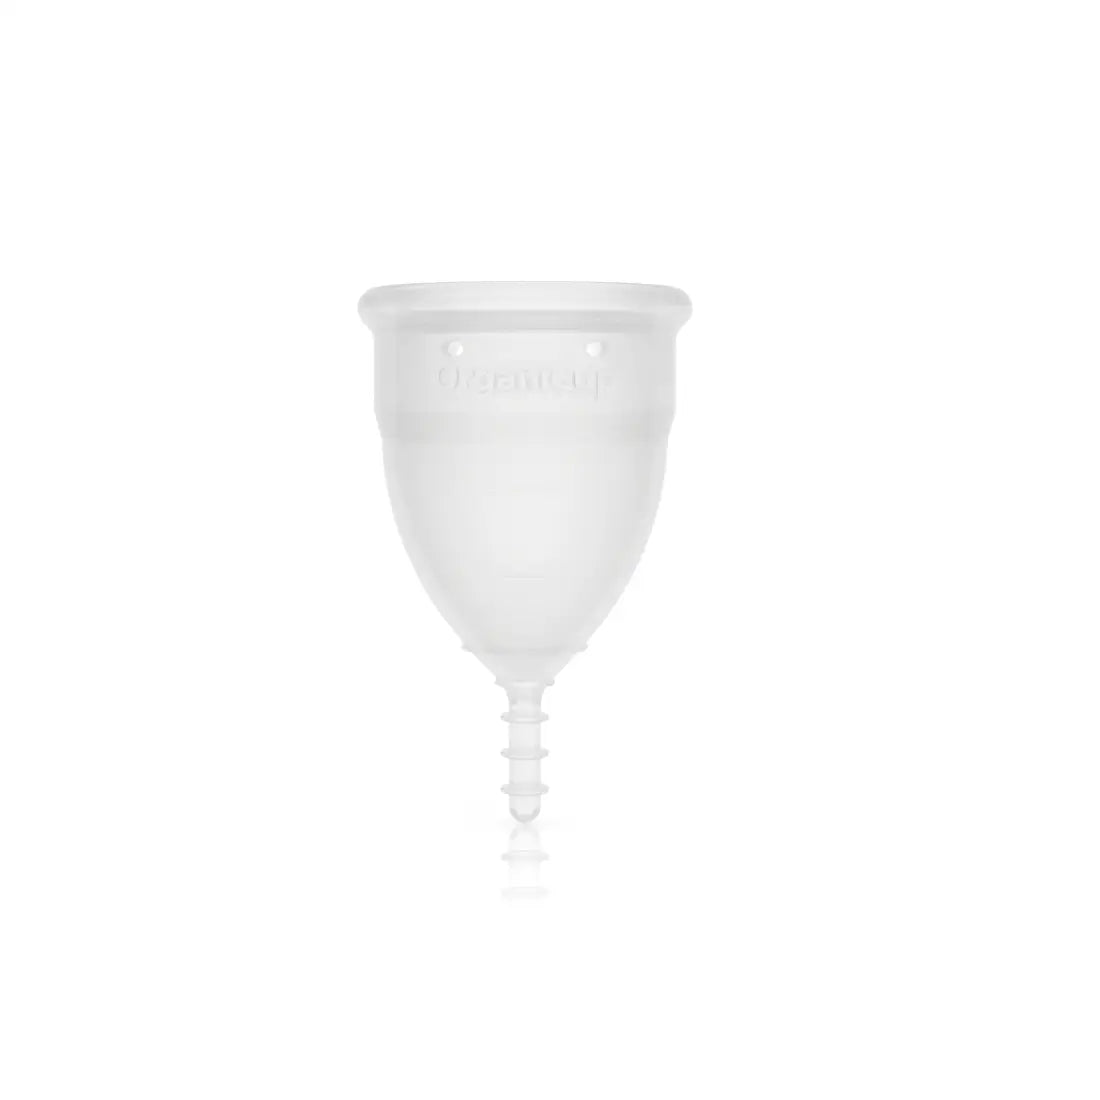 OrganiCup AllMatters Menstrual Cup B-CUP